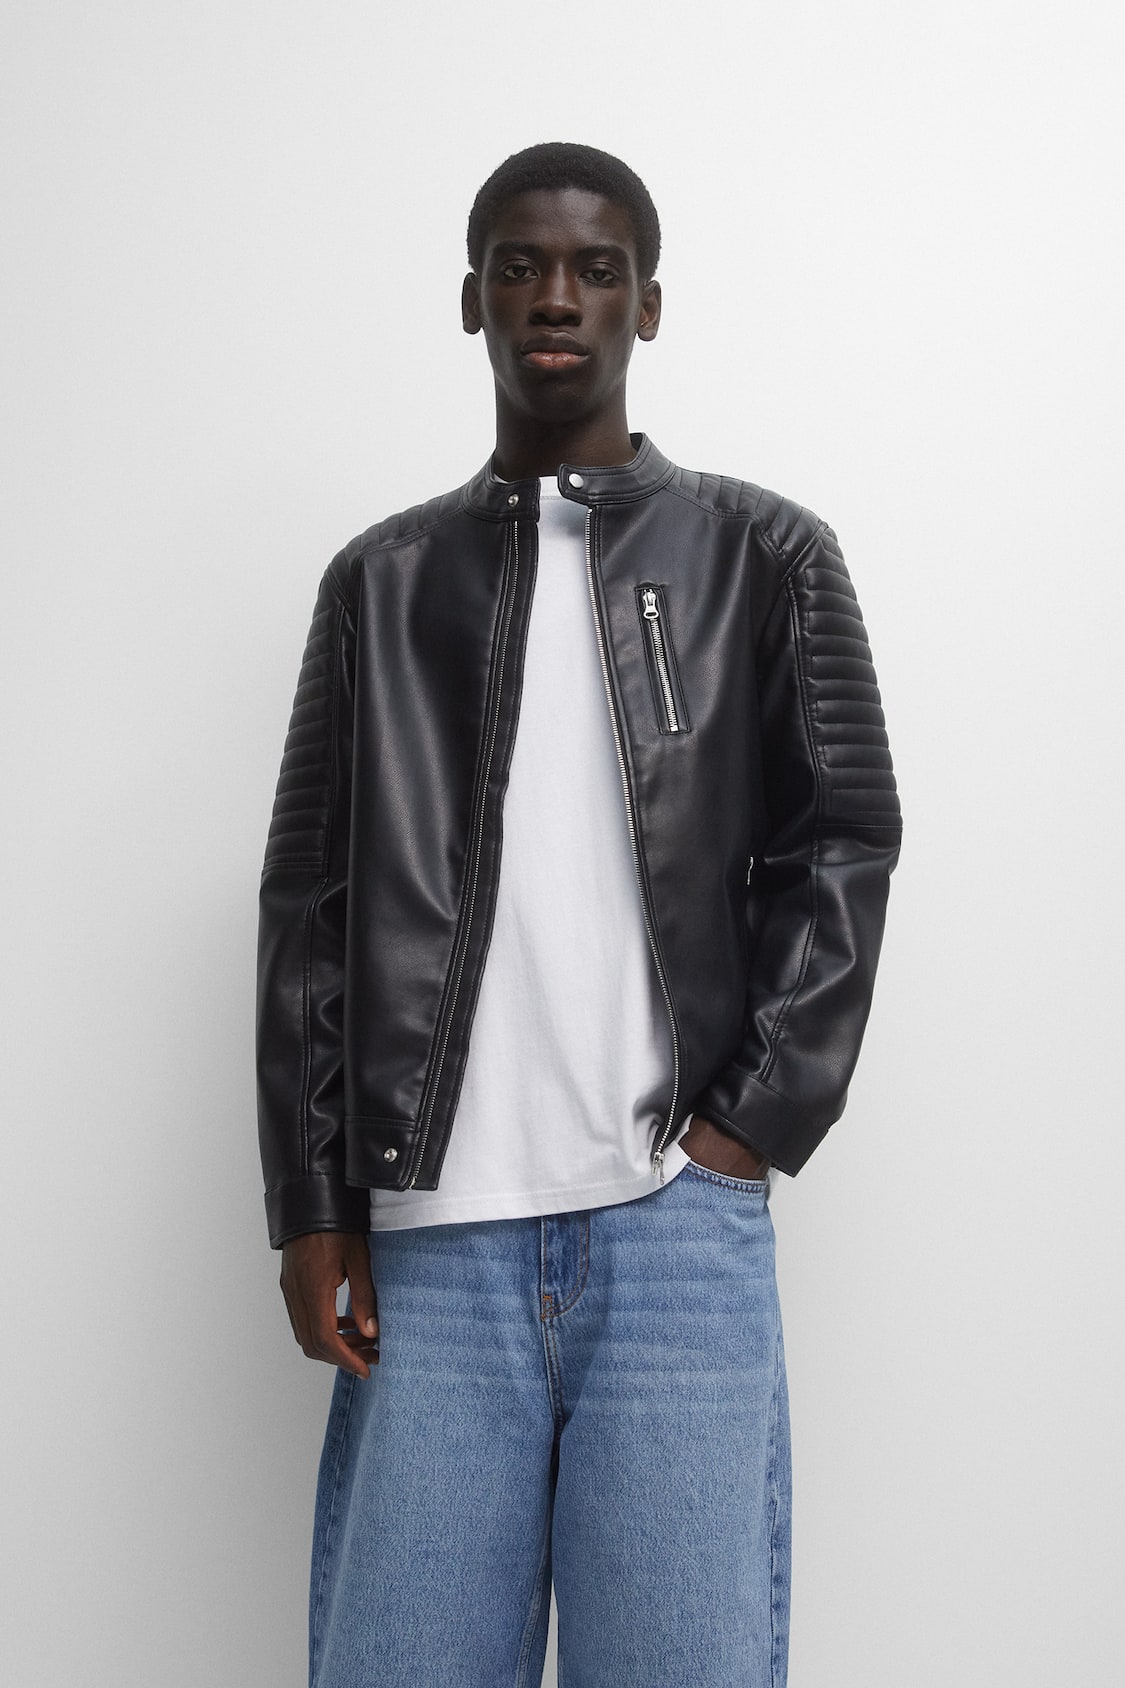 Pull&Bear motorcross faux leather jacket in red, black & white